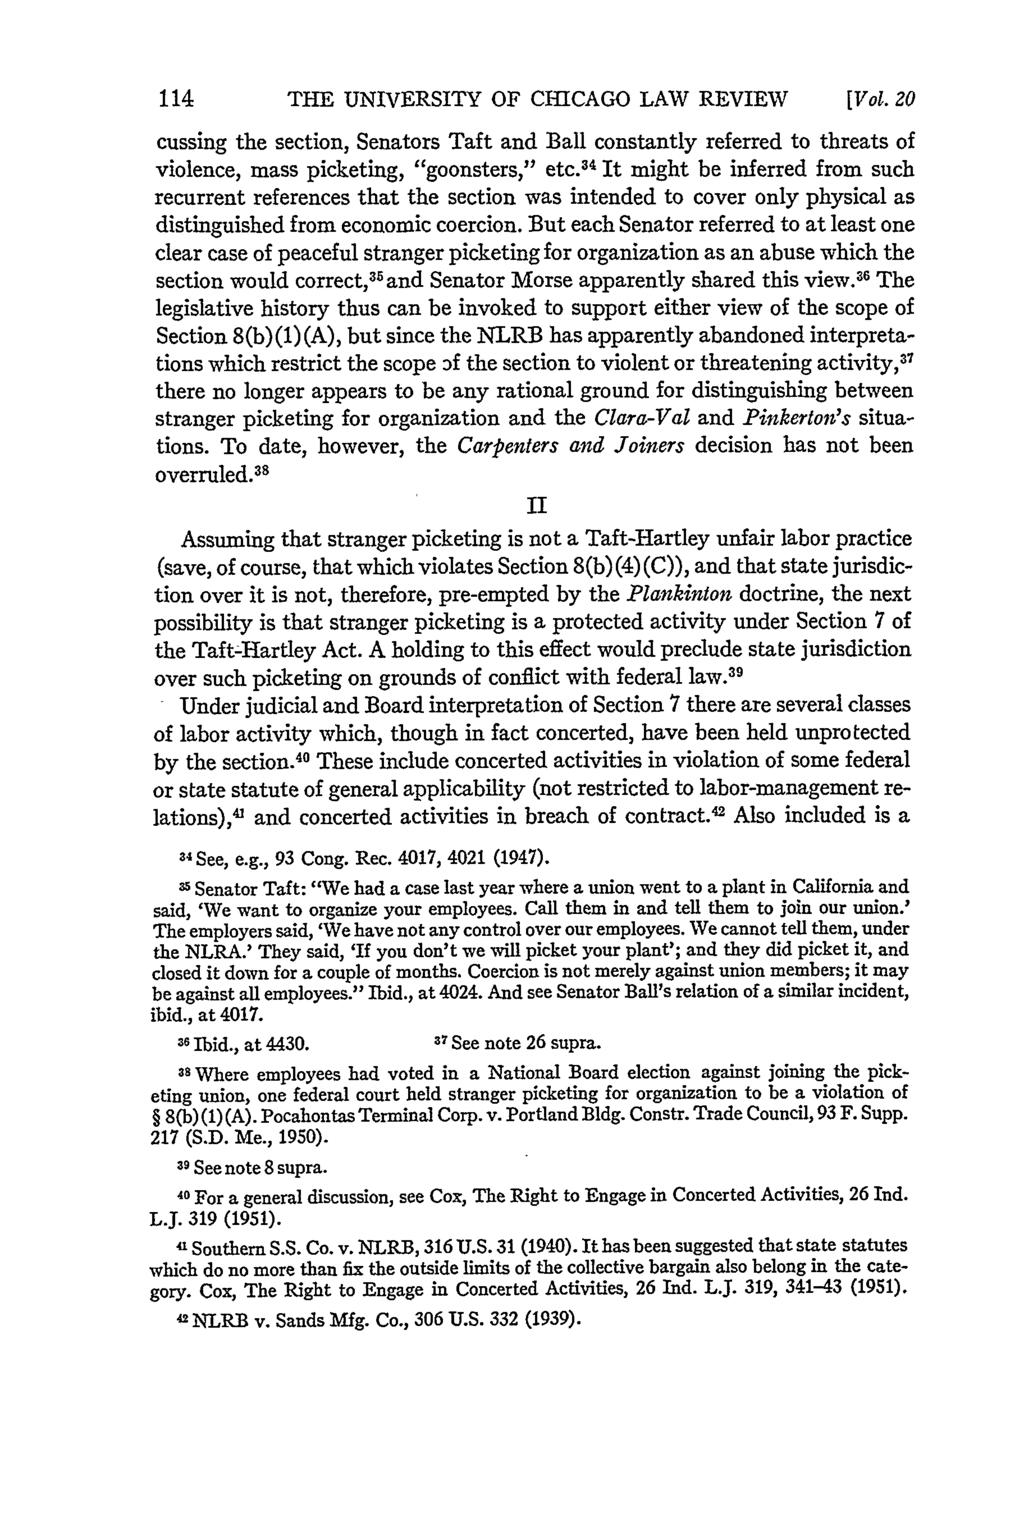 THE UNIVERSITY OF CMiCAGO LAW REVIEW [Vol. 20 cussing the section, Senators Taft and Ball constantly referred to threats of violence, mass picketing, "goonsters," etc.